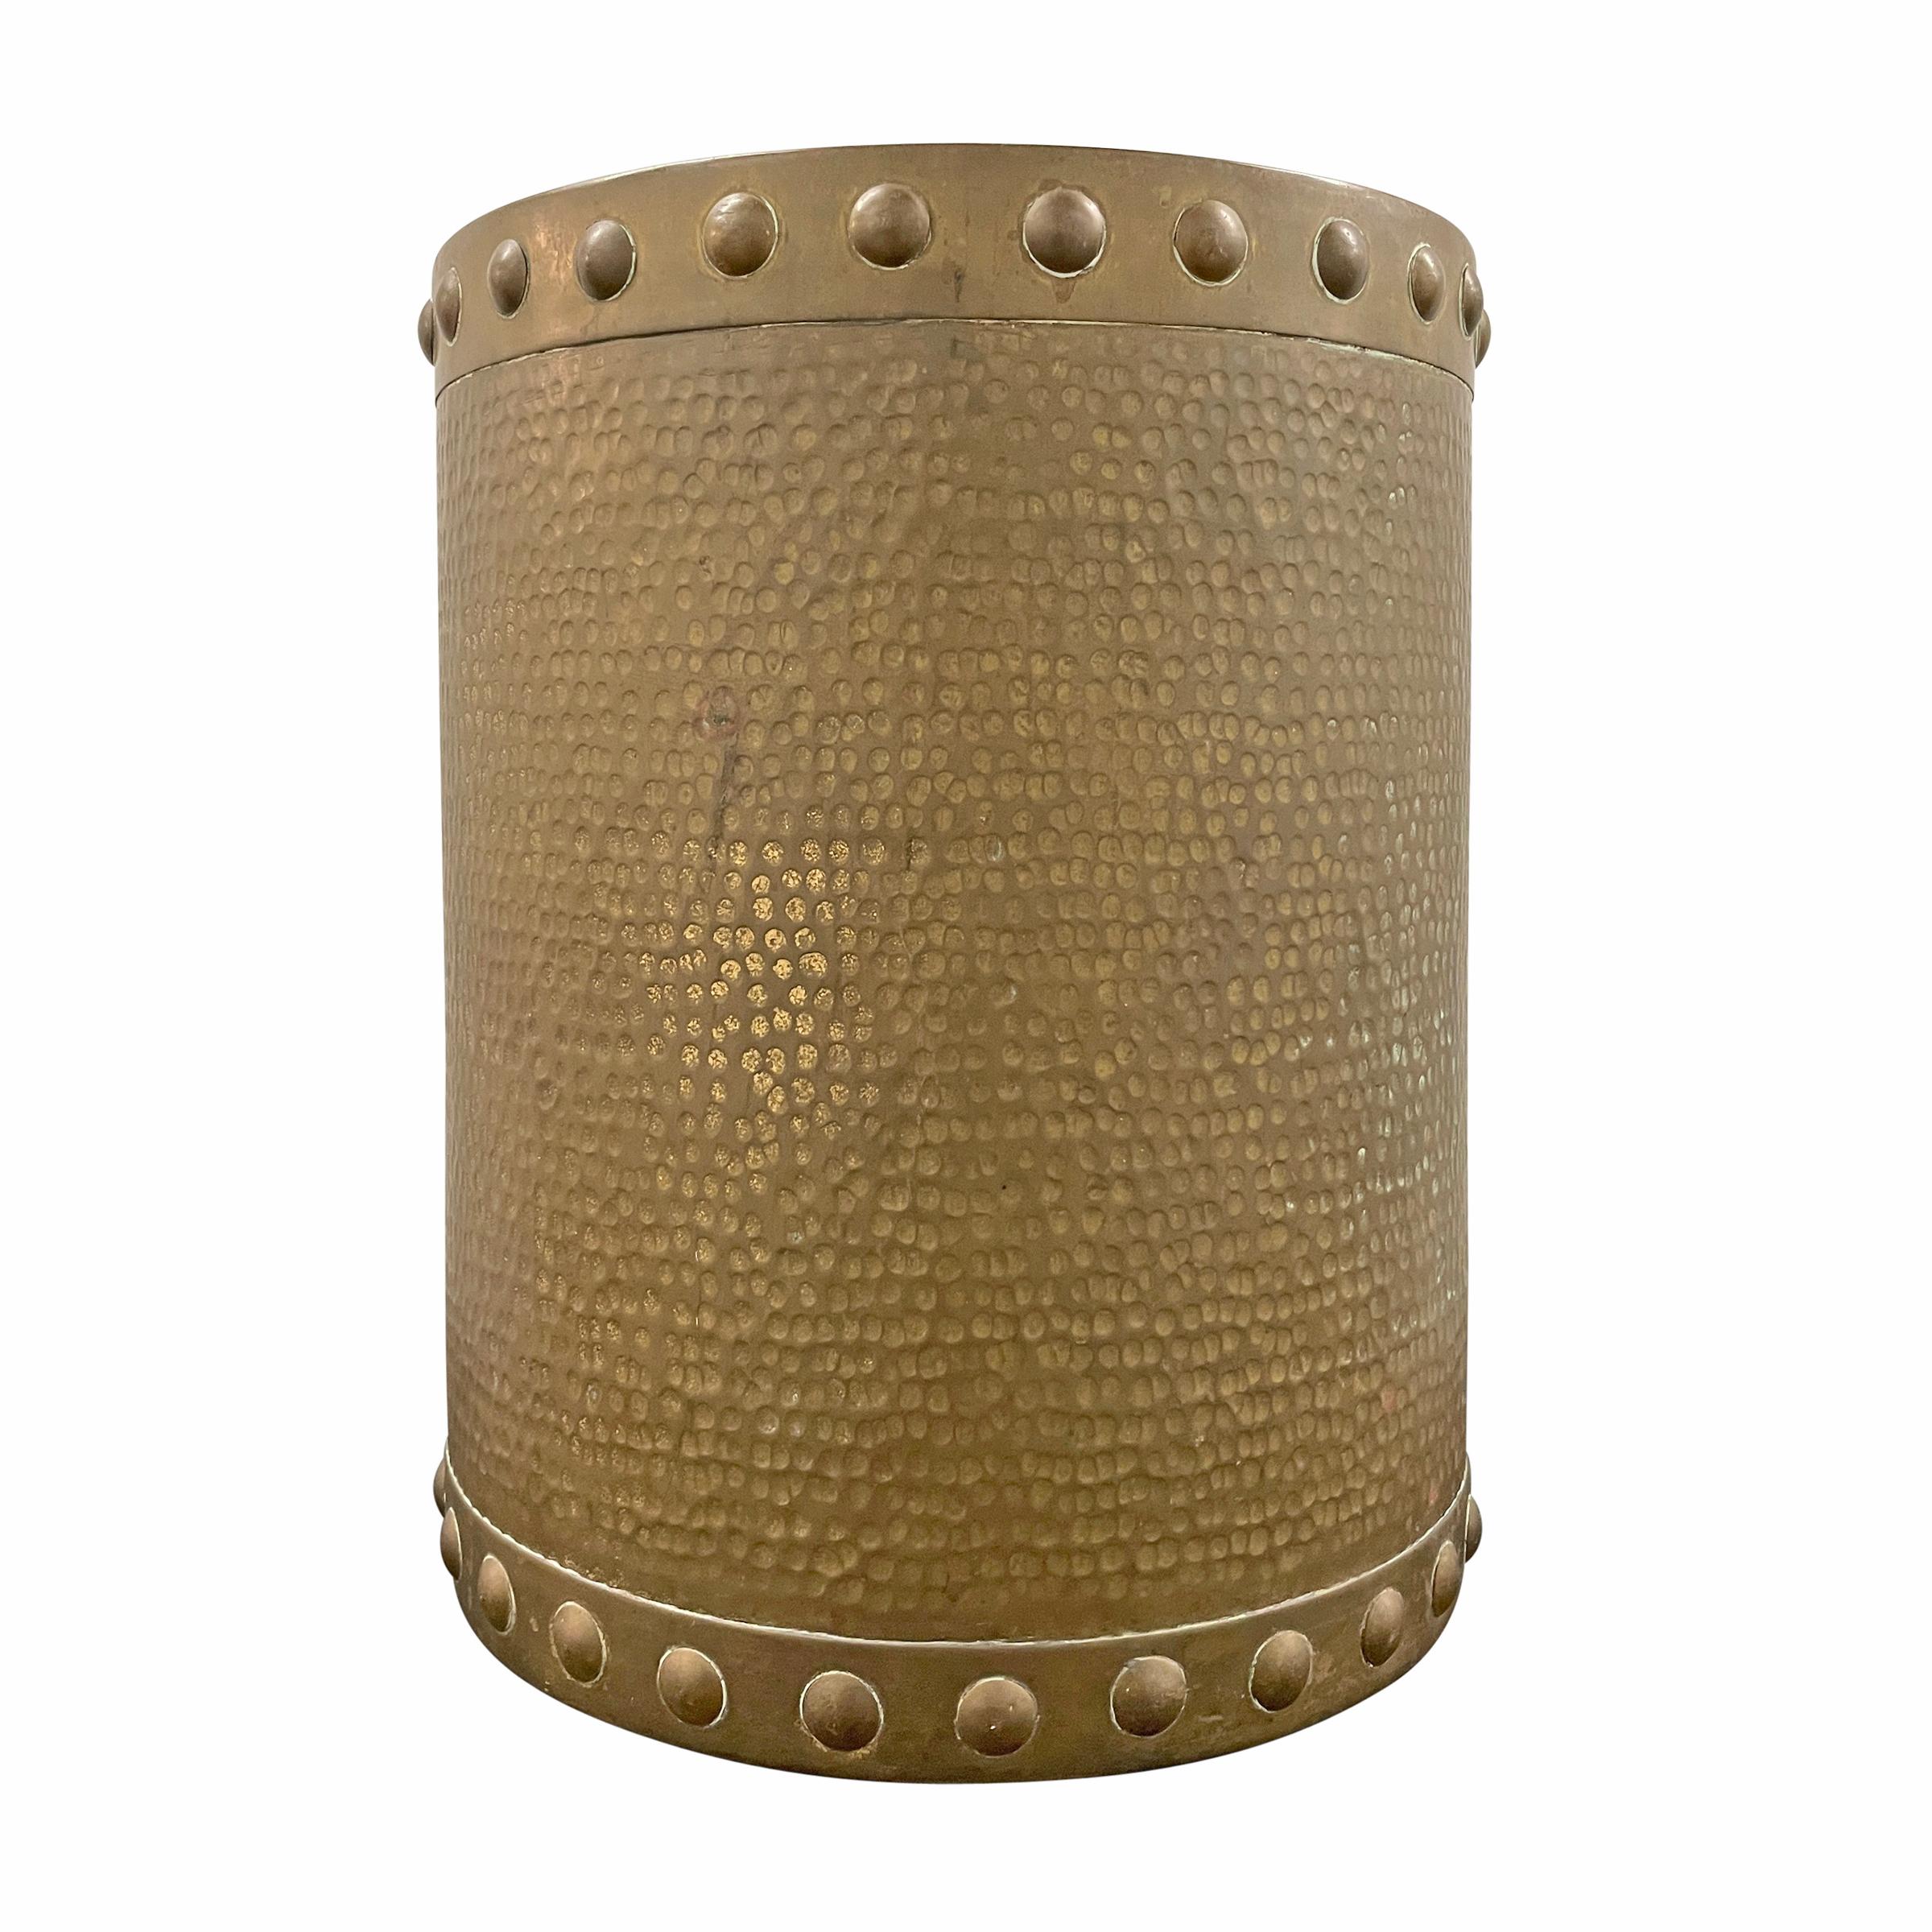 19th Century English Arts & Crafts Hammered Brass Bucket In Good Condition For Sale In Chicago, IL